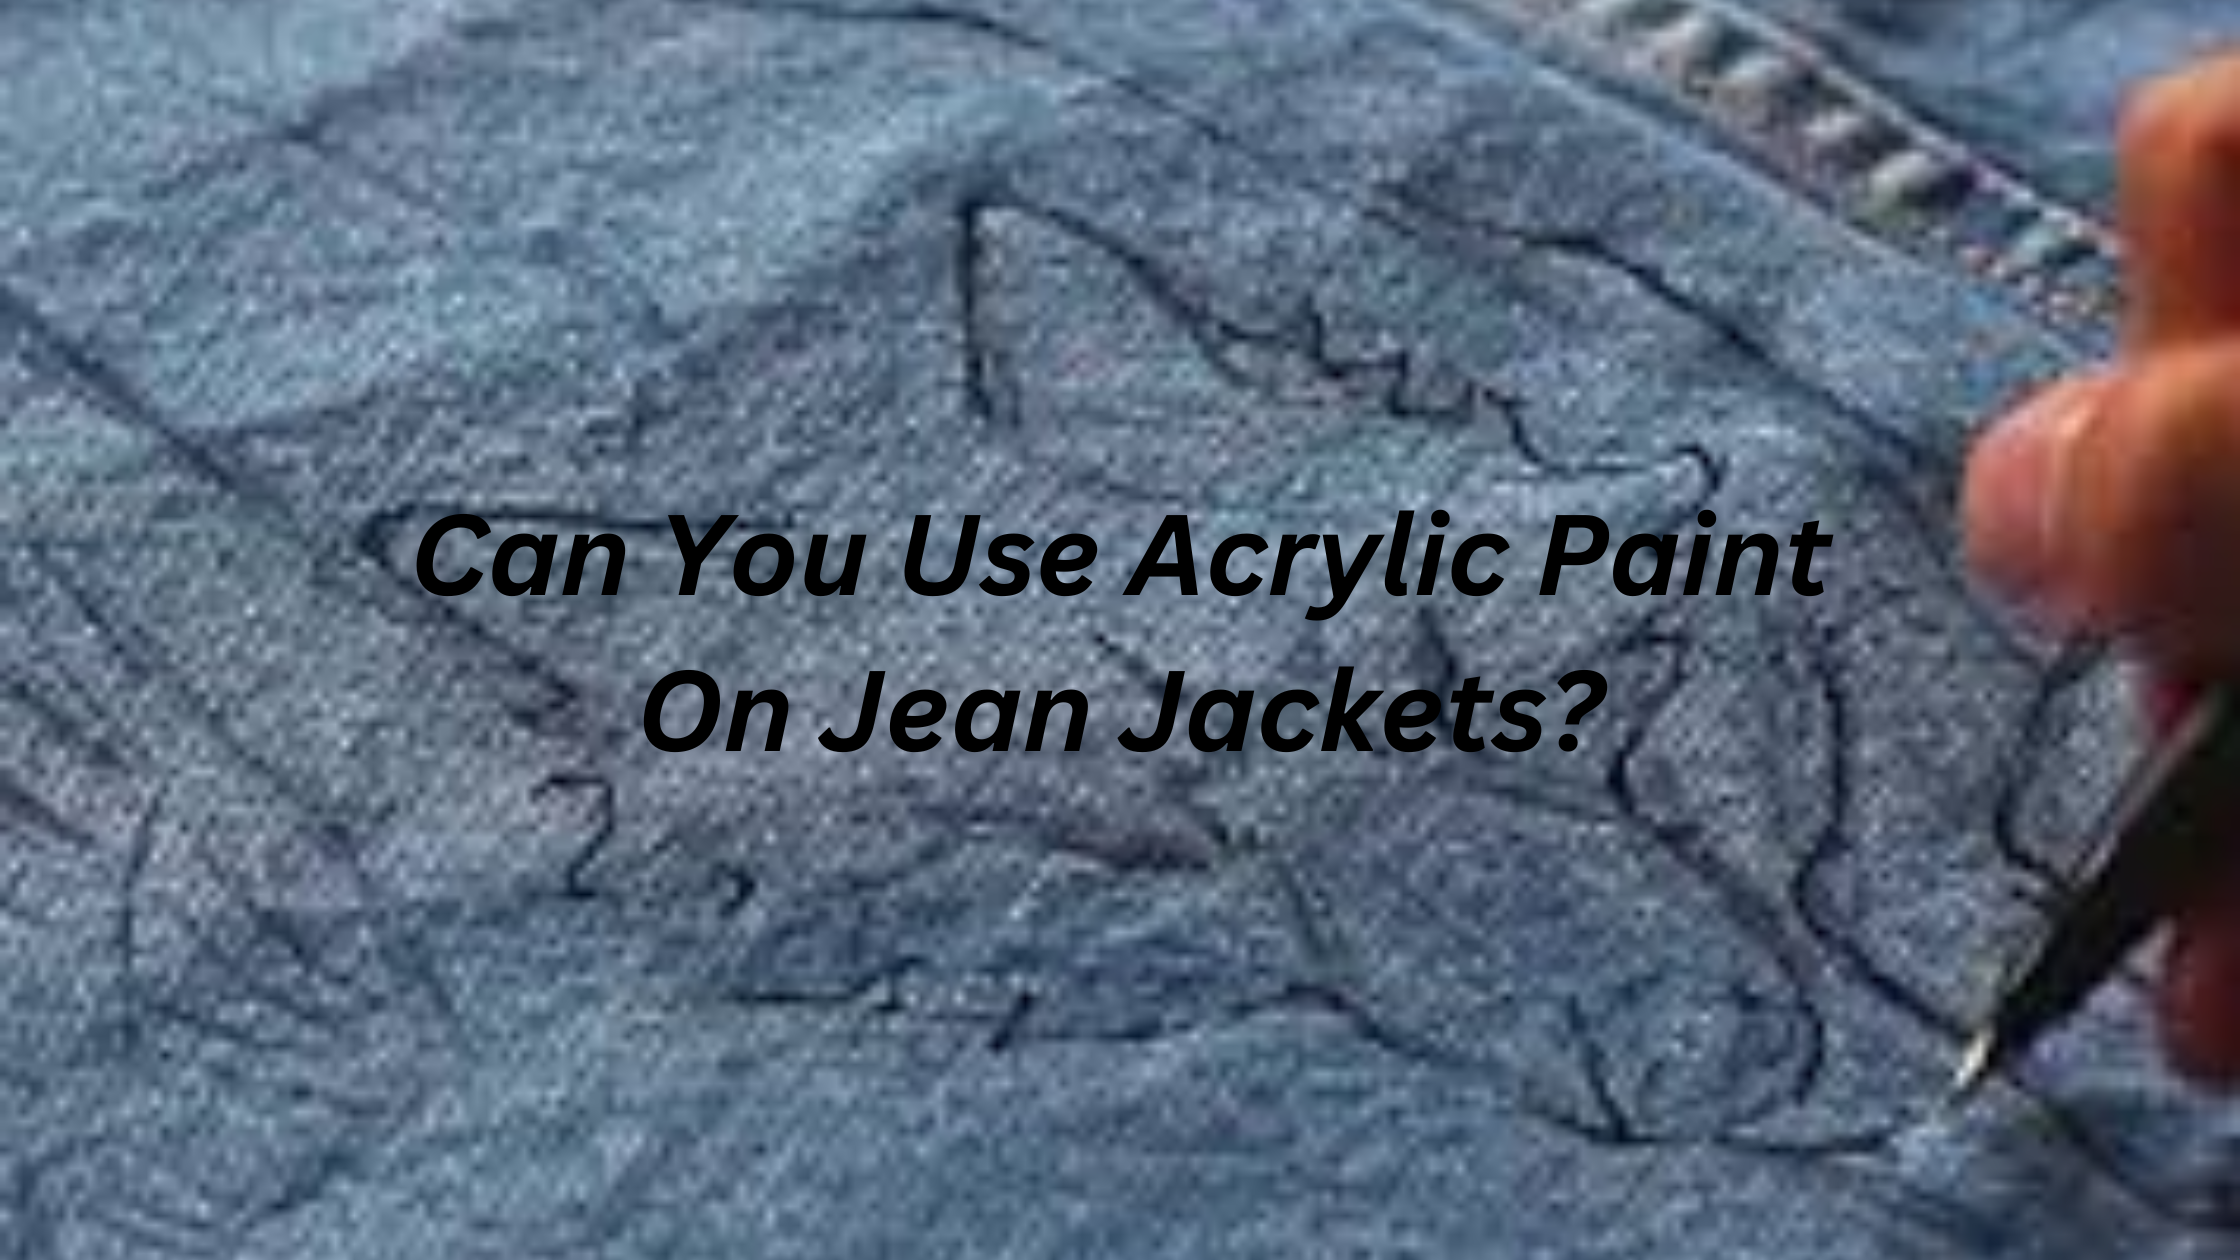 Can You Use Acrylic Paint On Jean Jackets?